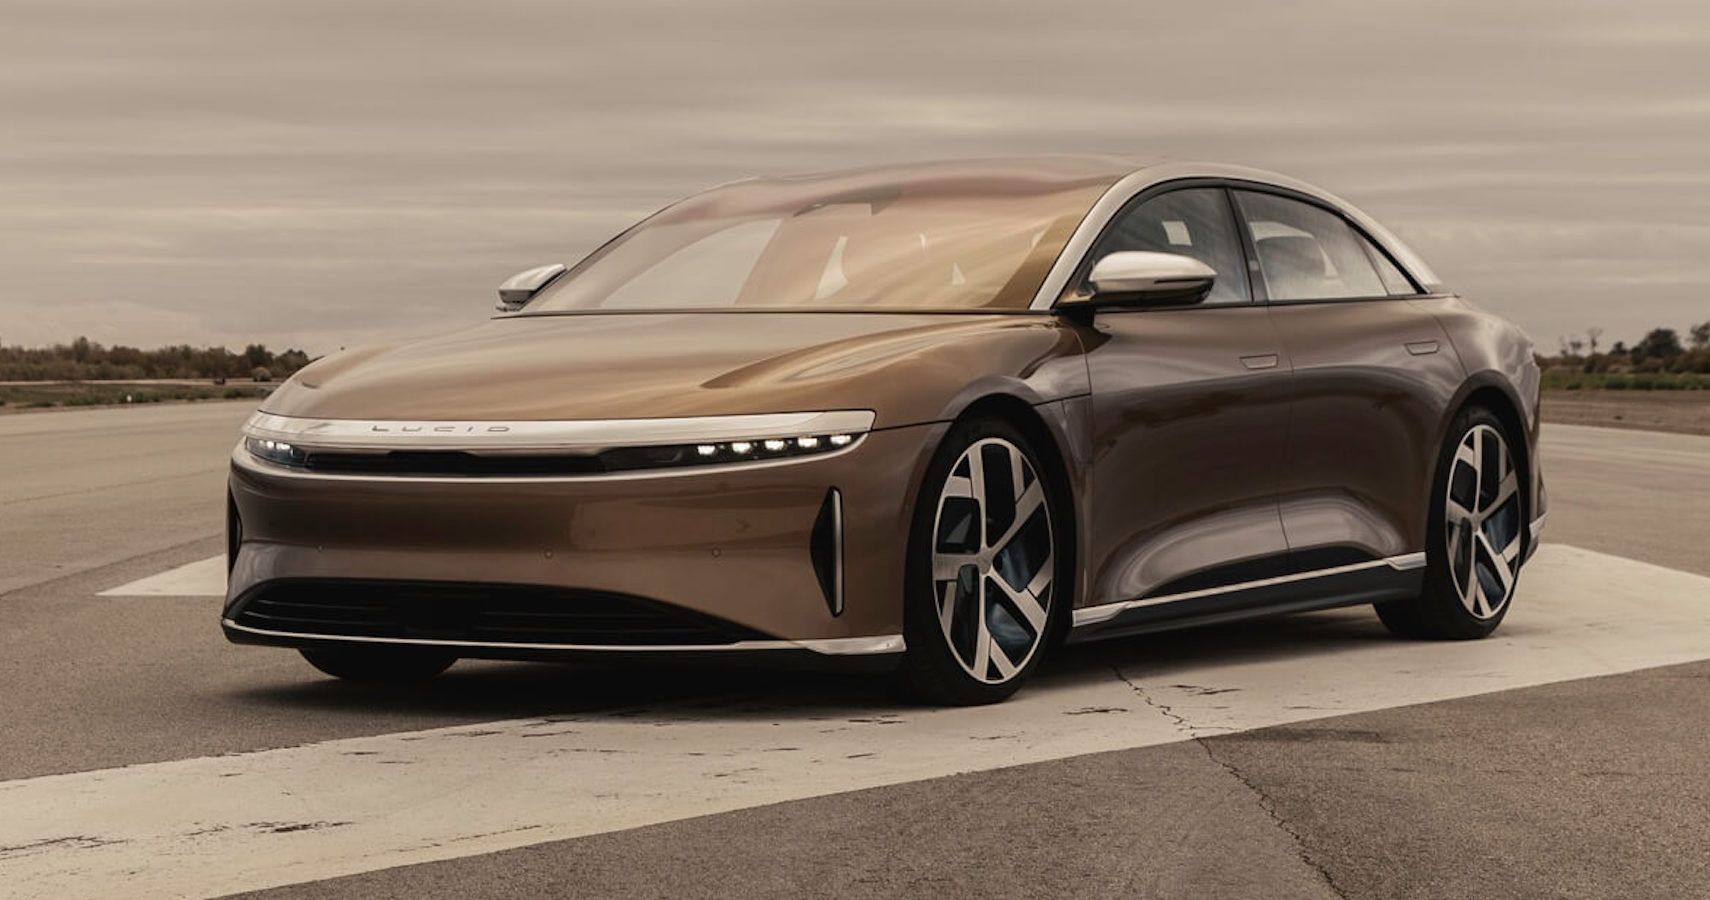 Lucid Air Rollout Delayed To Latter Half Of 2021, Says CEO